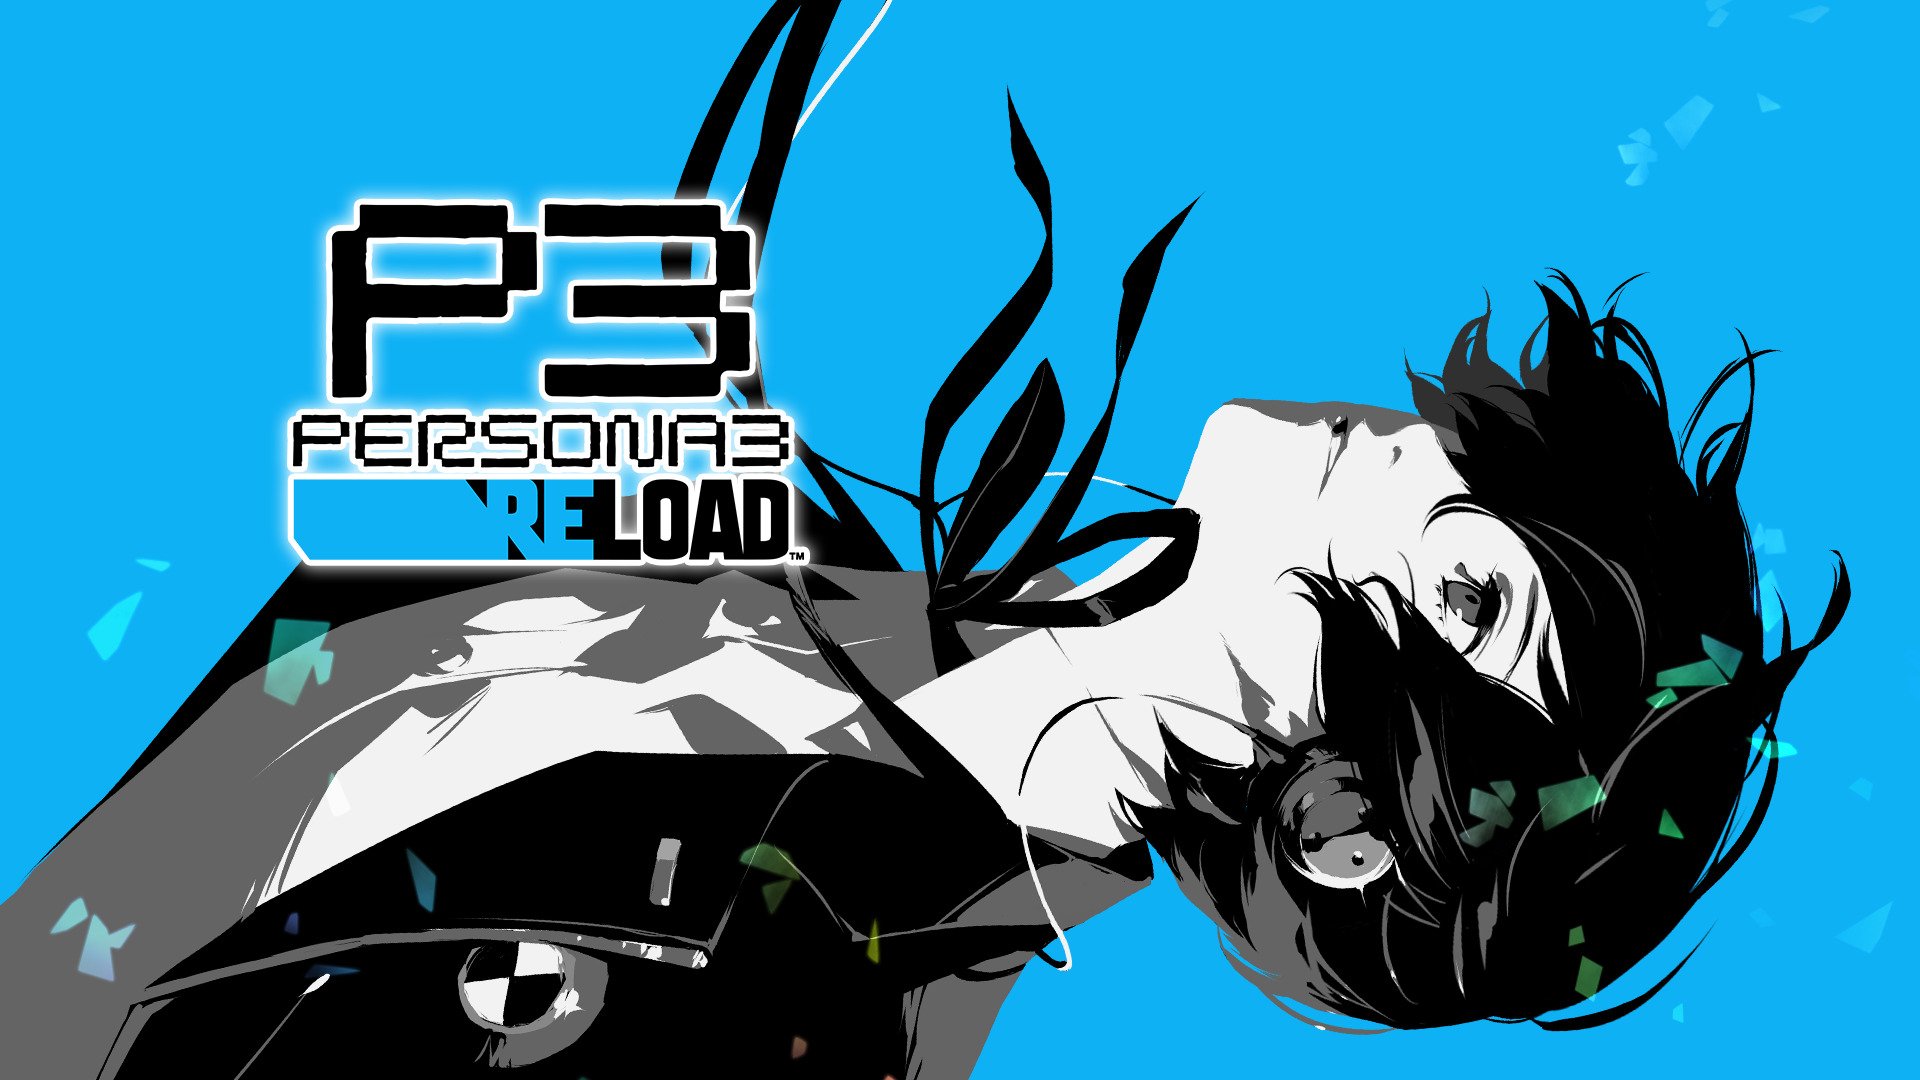 Persona 3 Reload Includes Certain Story Elements from Persona 3 FES – Producer